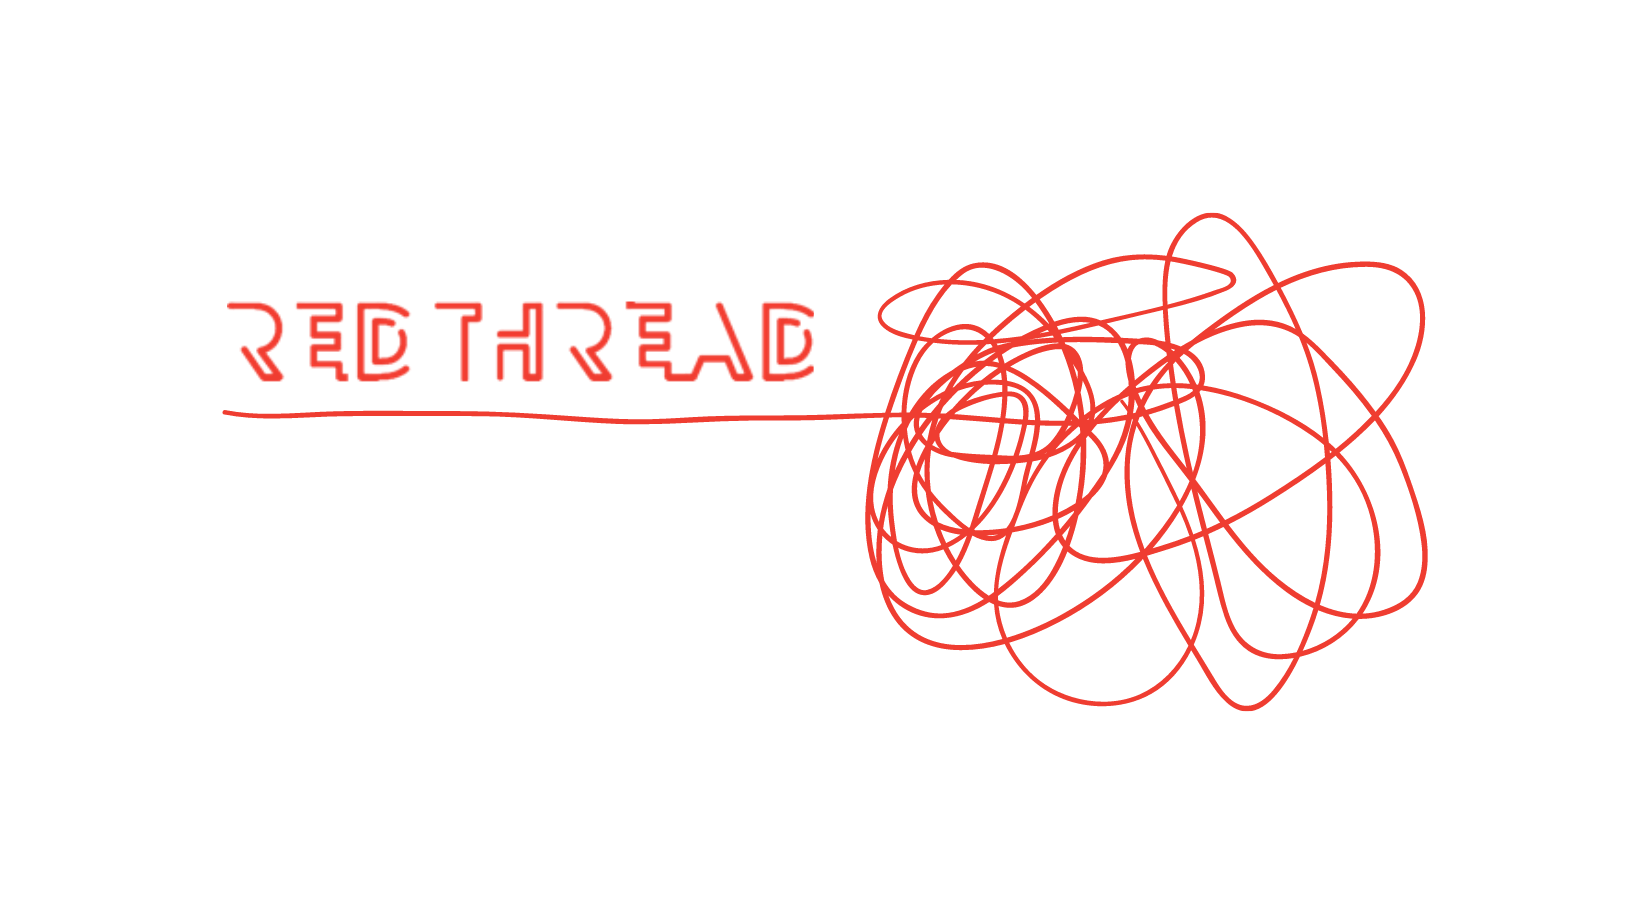 Graphic: Red Thread Logo With An Entangled Ball Of Thread